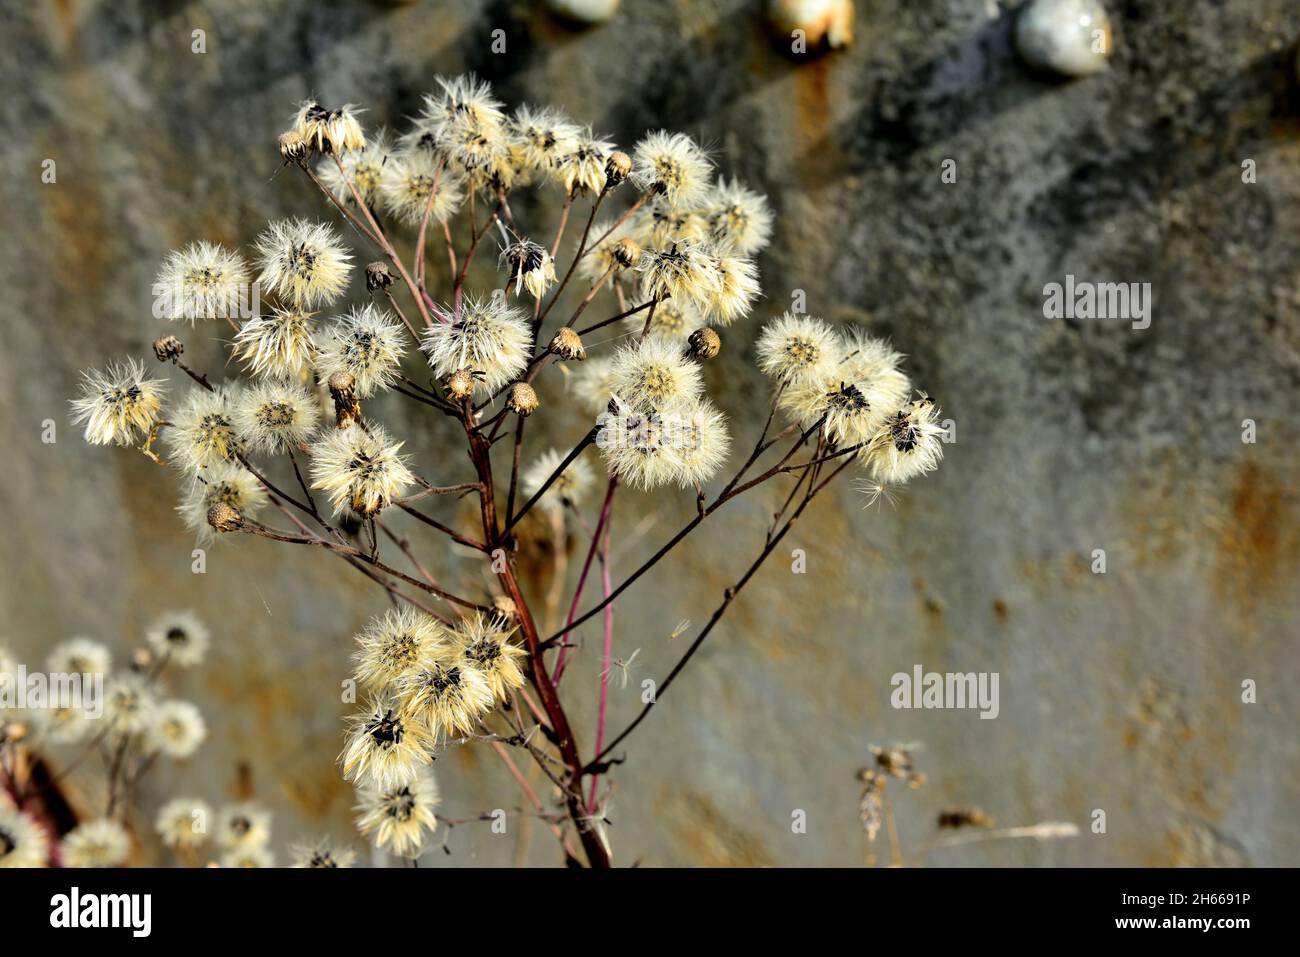 Natural roadside wild weed seed heads in front of abstract rusty steel background, UK Stock Photo